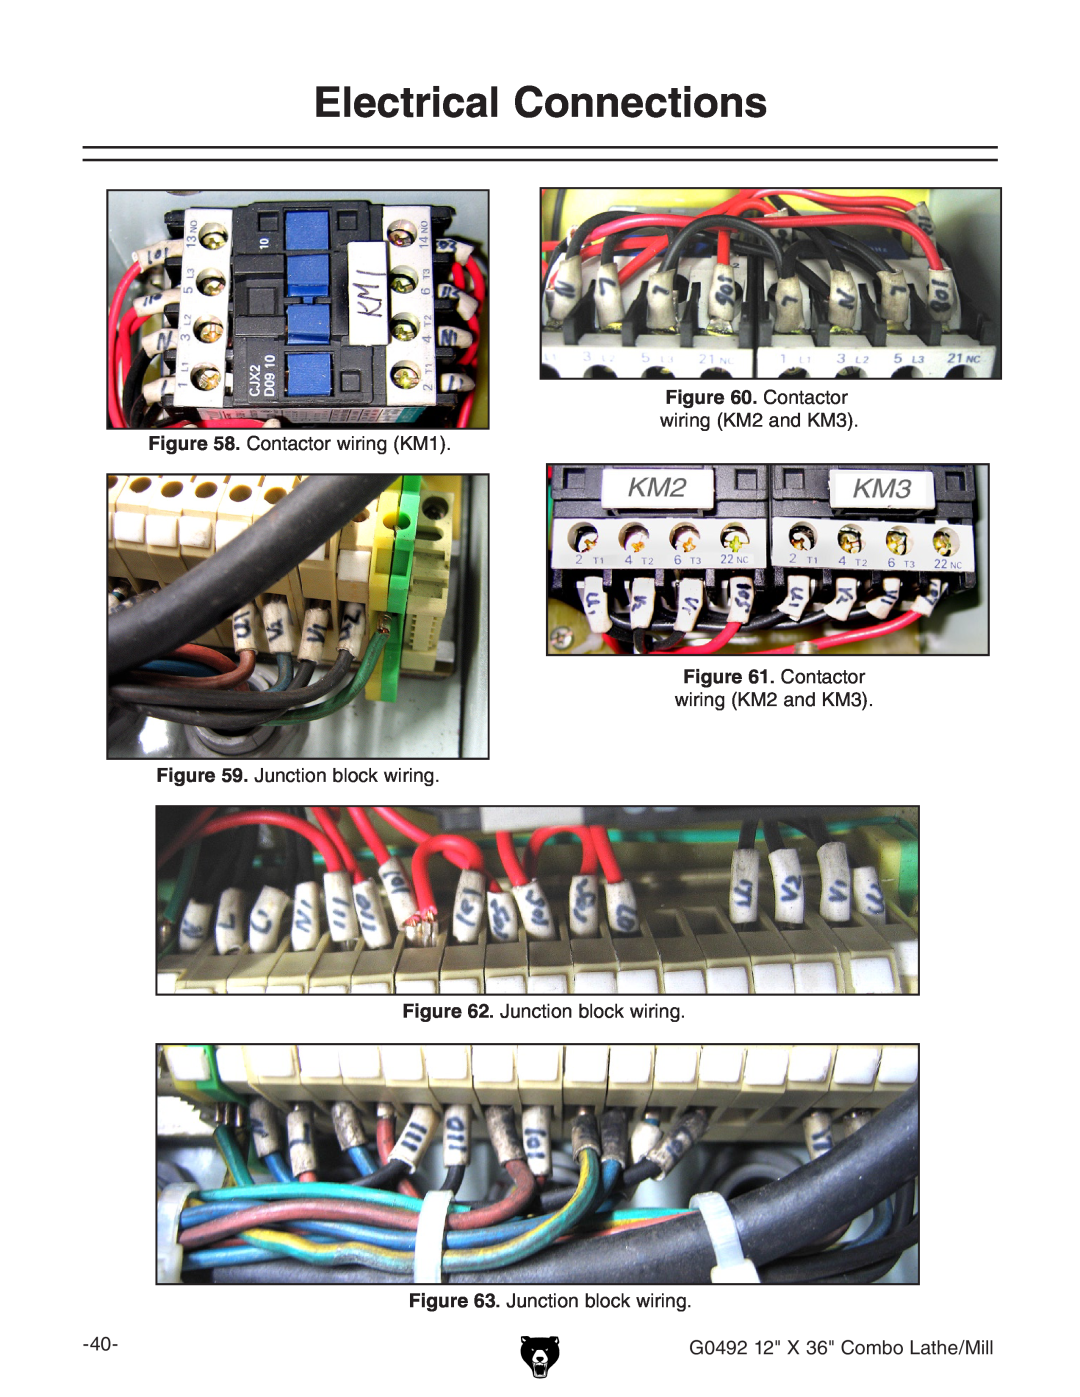 Grizzly G0492 Electrical Connections, Contactor wiring KM1 . Junction block wiring, Contactor wiring KM2 and KM3 